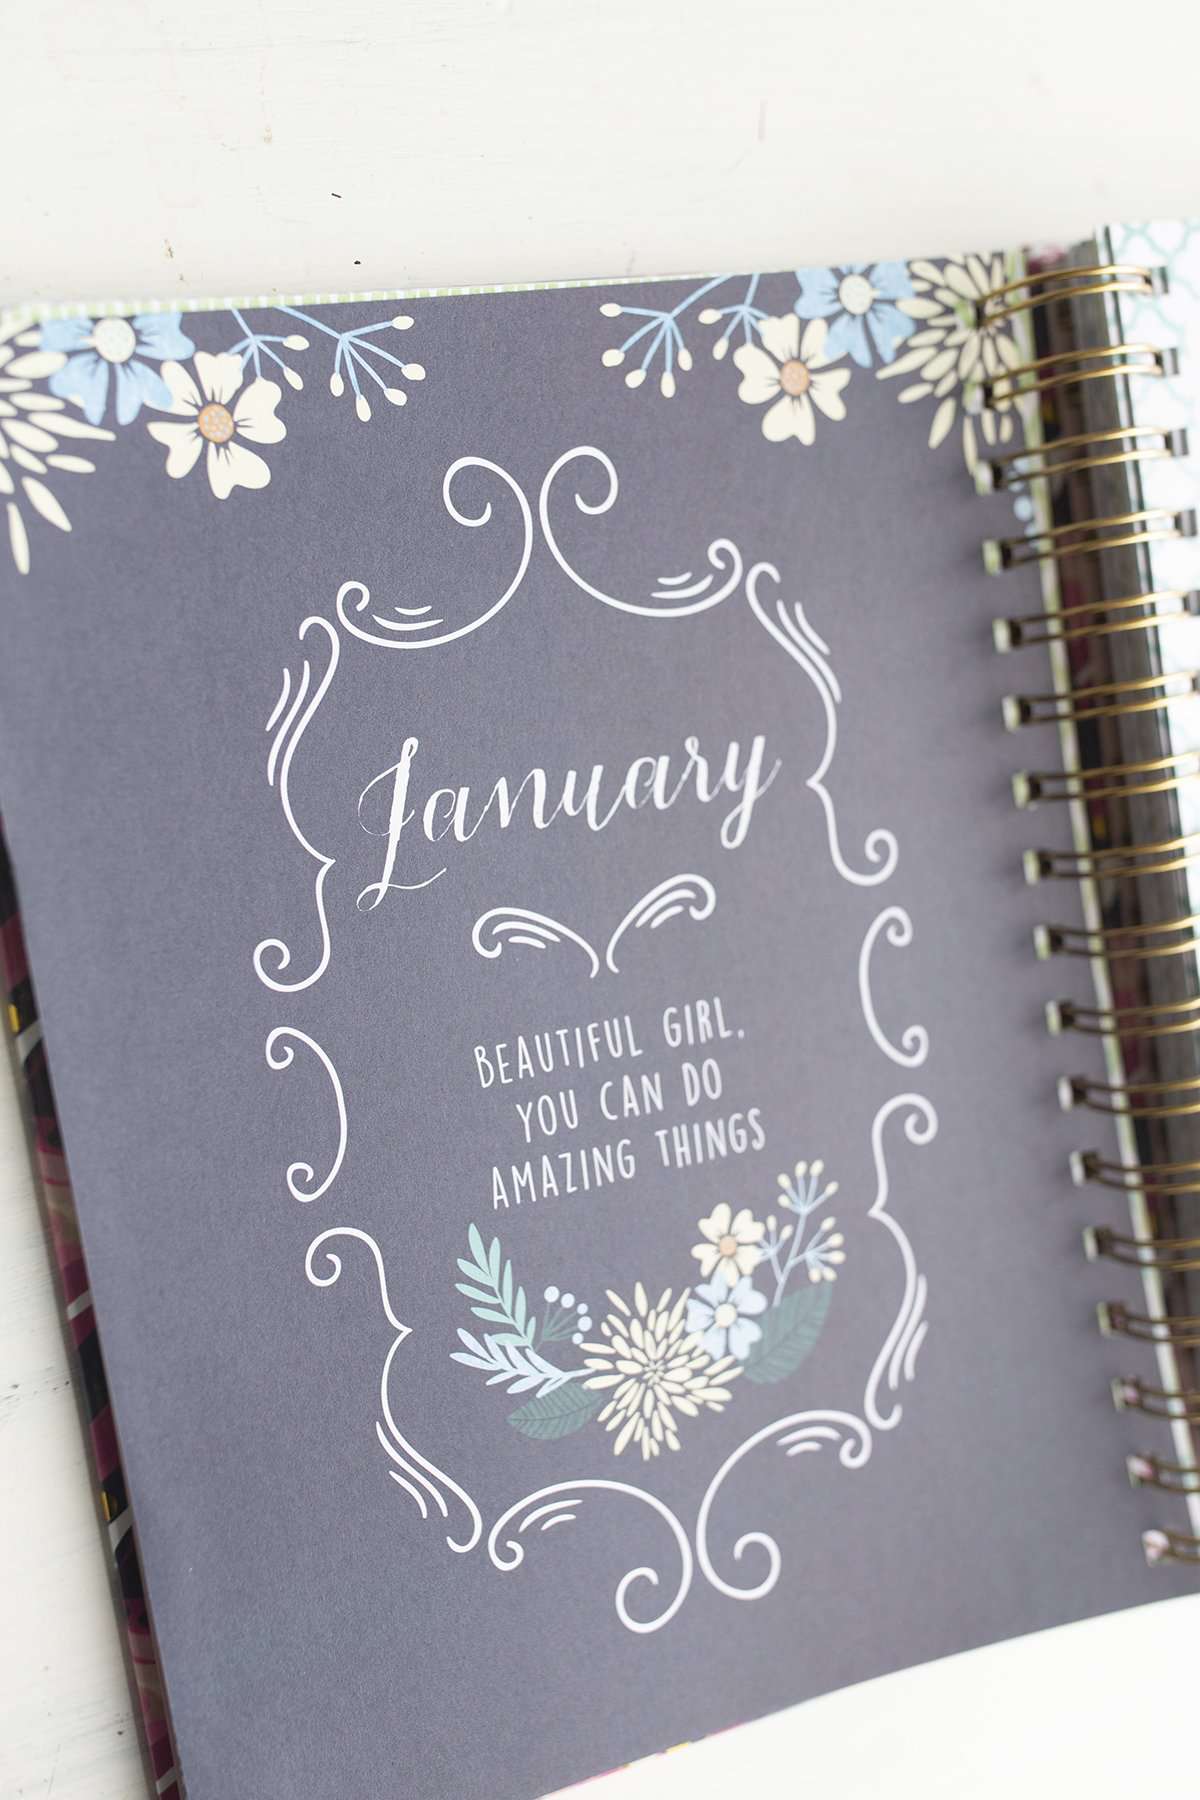 Pink, purple and gold foil Hardcover, 12 month spiral Life Planner runs January 2019 through December 2019, contains scripture verses